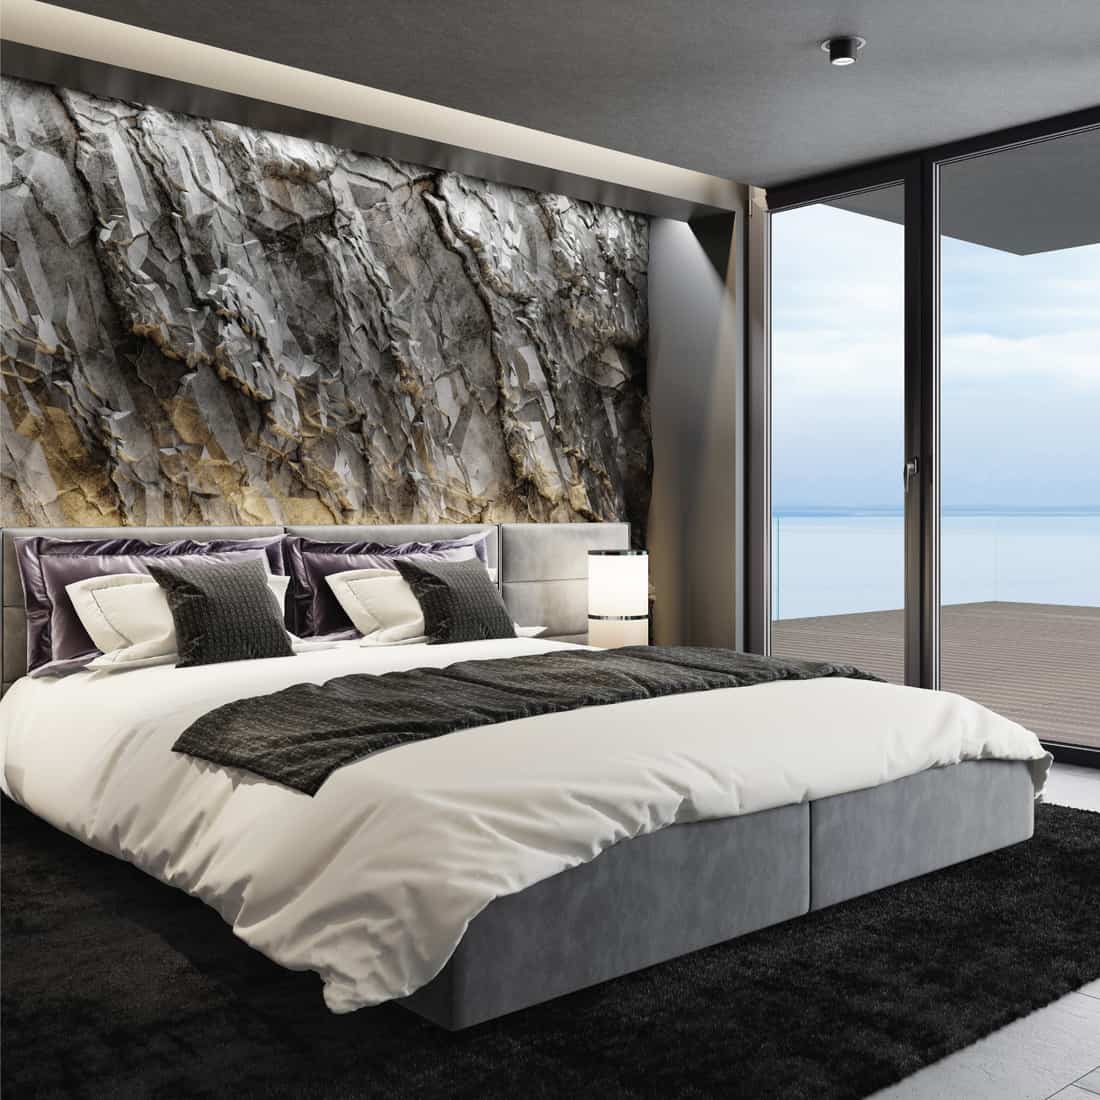 Modern matte black interior with mountain natural stone rock wall, king-size bed with black gloss side tables, black carpet and ceiling with down lighters